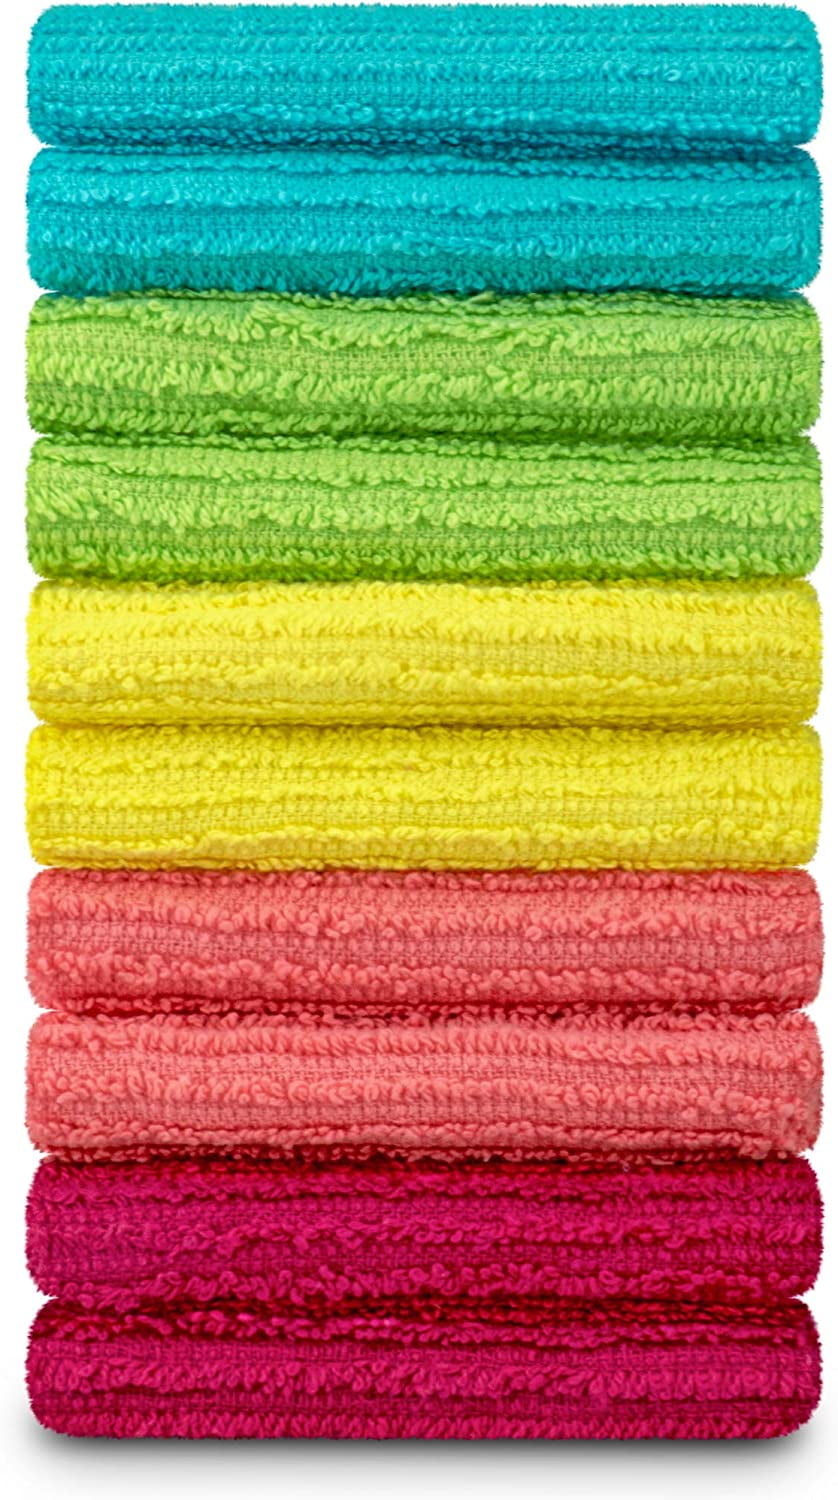 Decorrack 10 Pack 100% Cotton Bar Mop, 16 x 19 inch, Ultra Absorbent, Heavy Duty Kitchen Cleaning Towels, Teal Green (10 Pack)